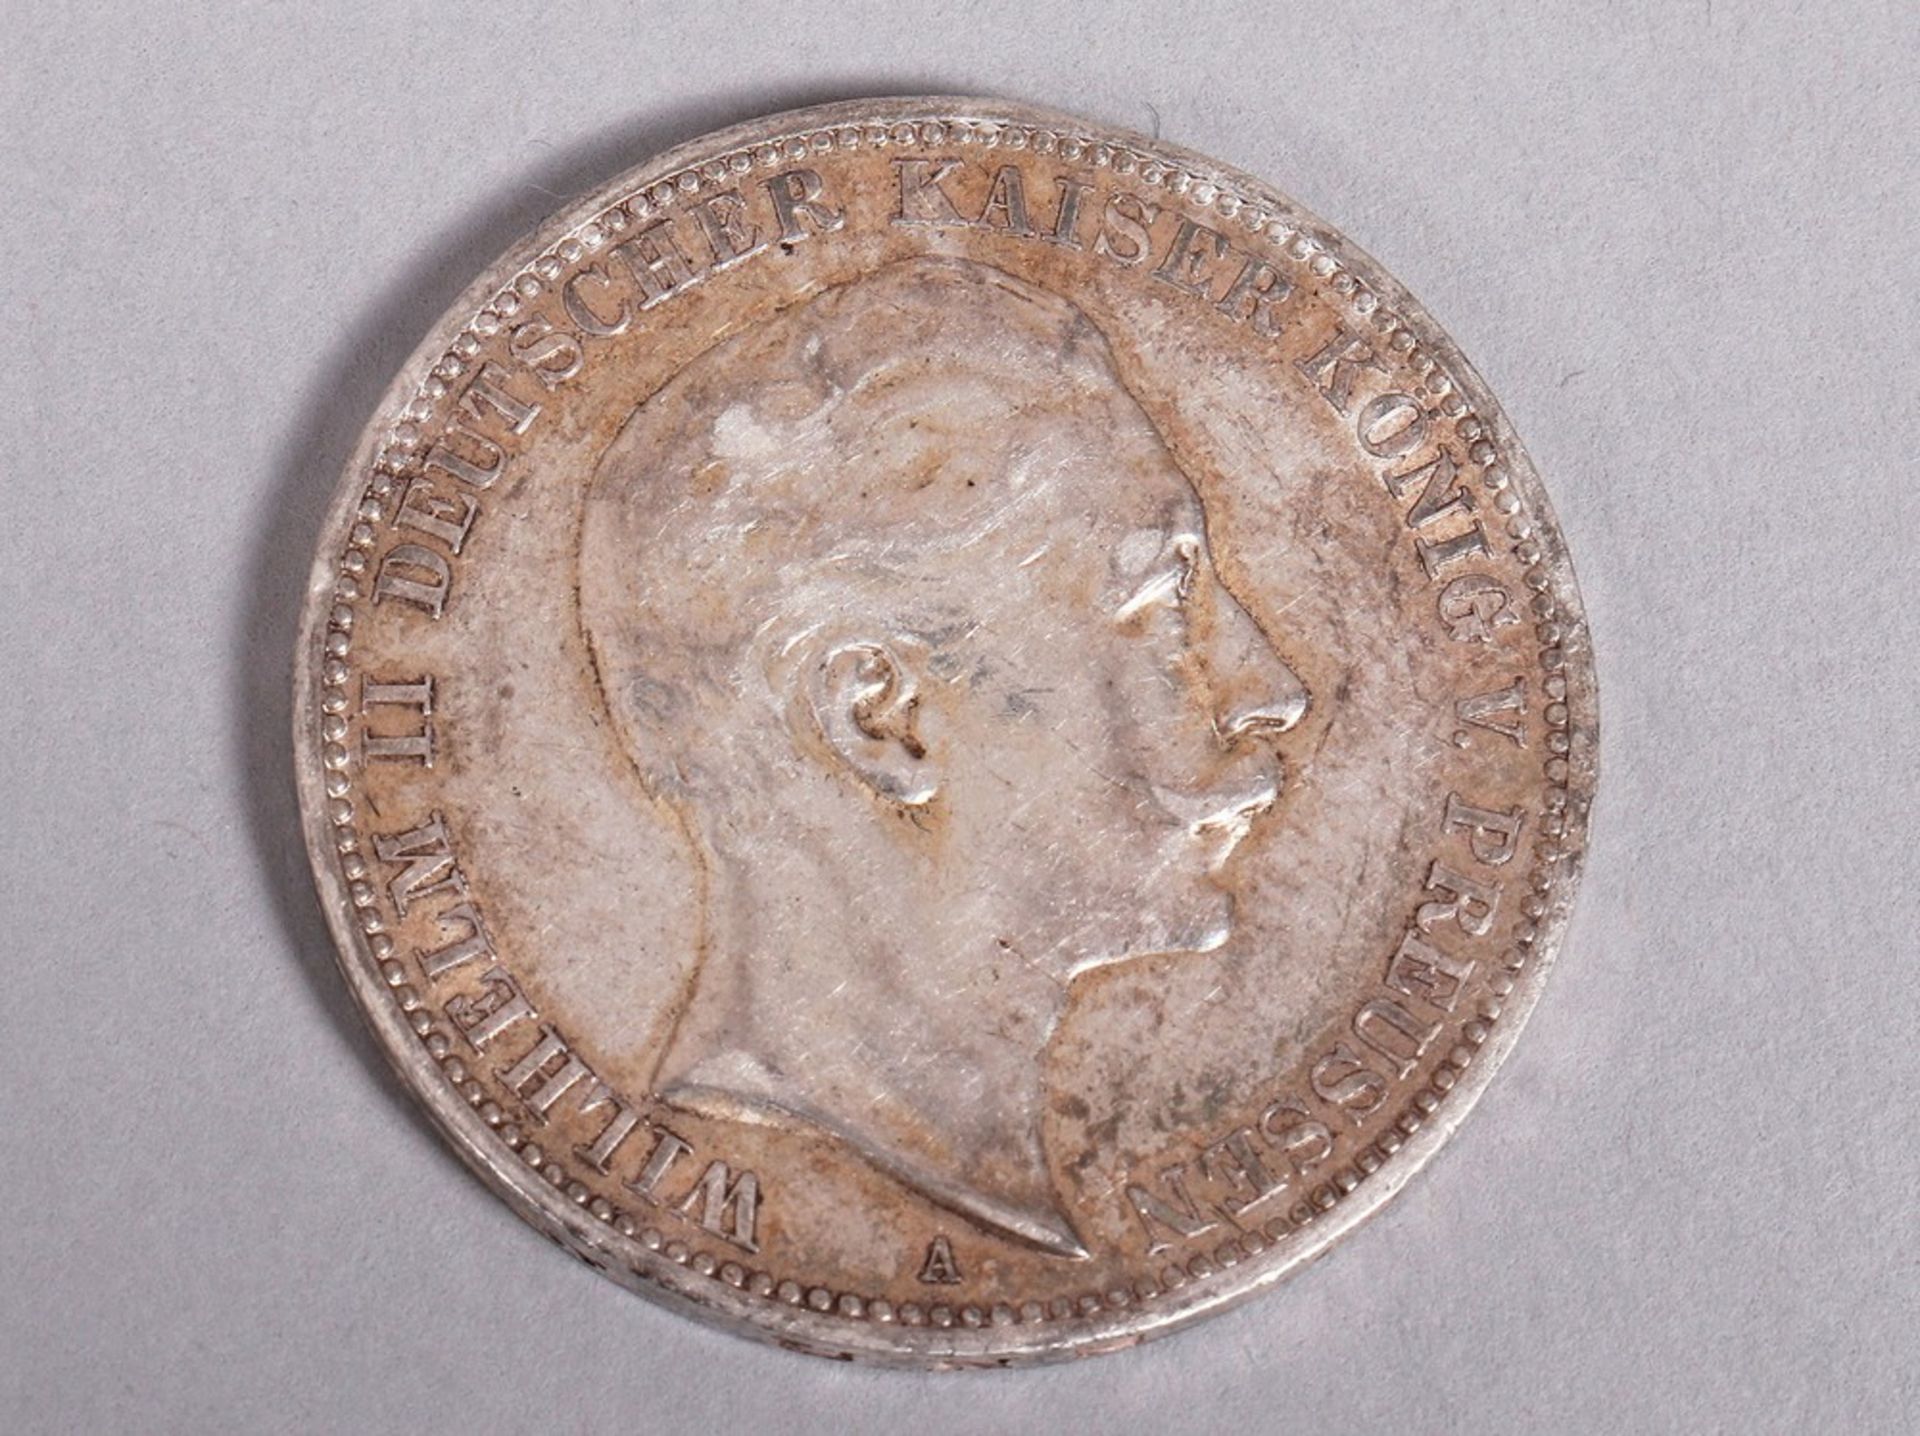 Prussia, 3 marks, 1912 A, SS-VZ, silver